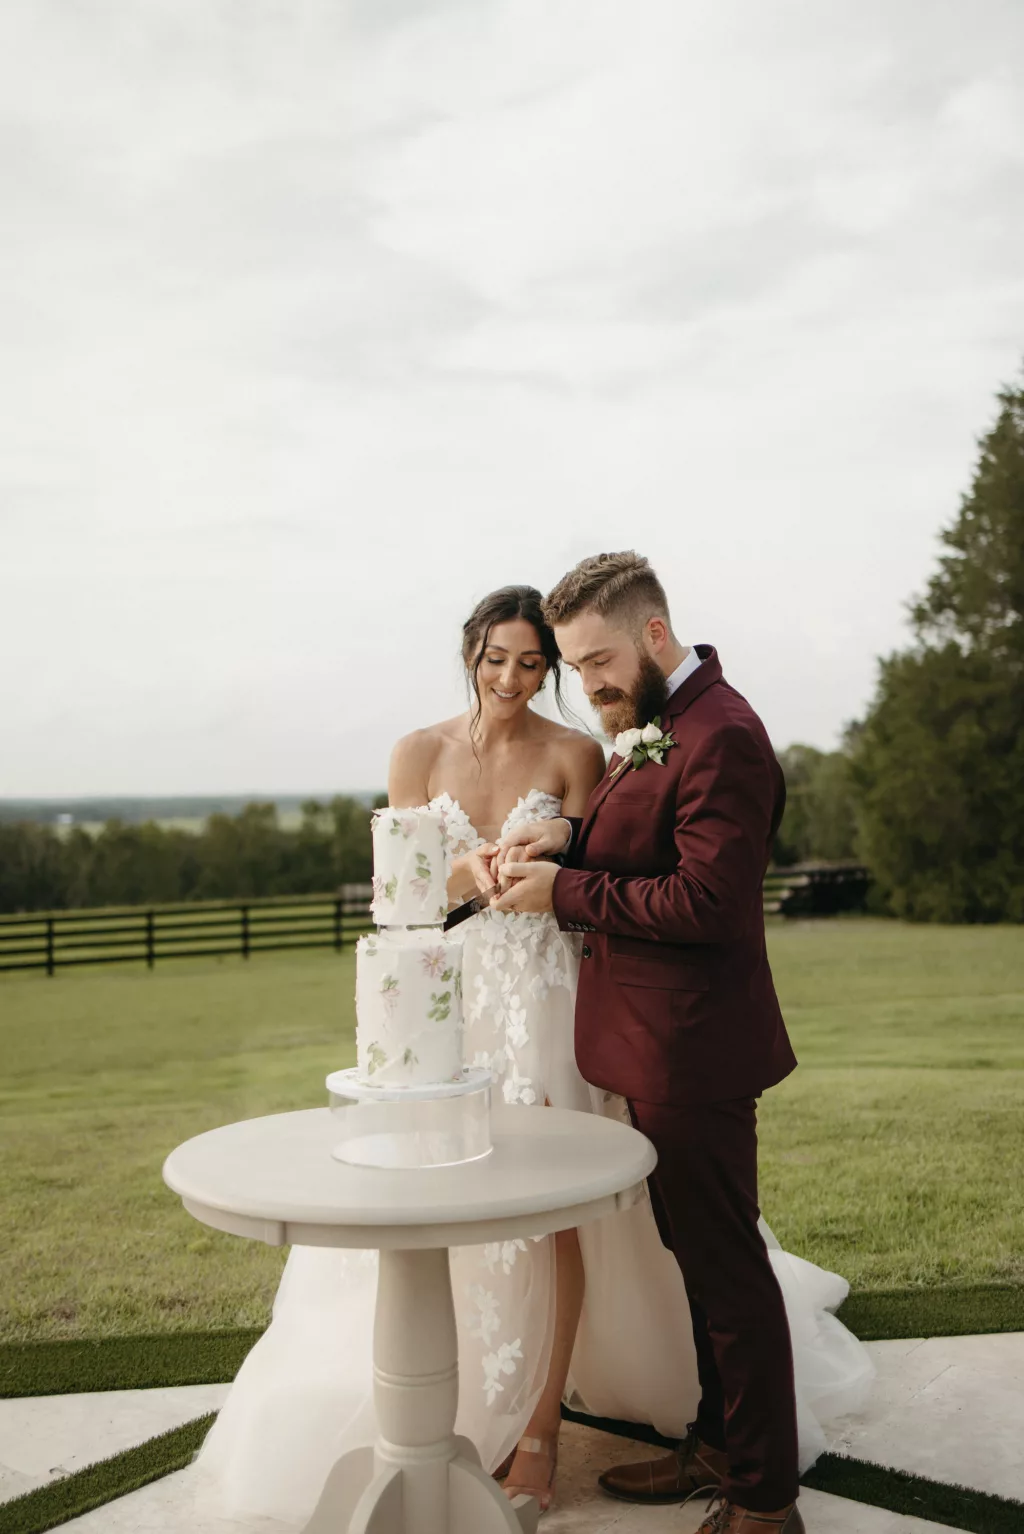 Bride and Groom Cutting the Cake Wedding Portrait | Round Two-Tiered Cake with Floating Tier and Floral Detail Inspiration | Tampa Event Planner The Olive Tree Weddings